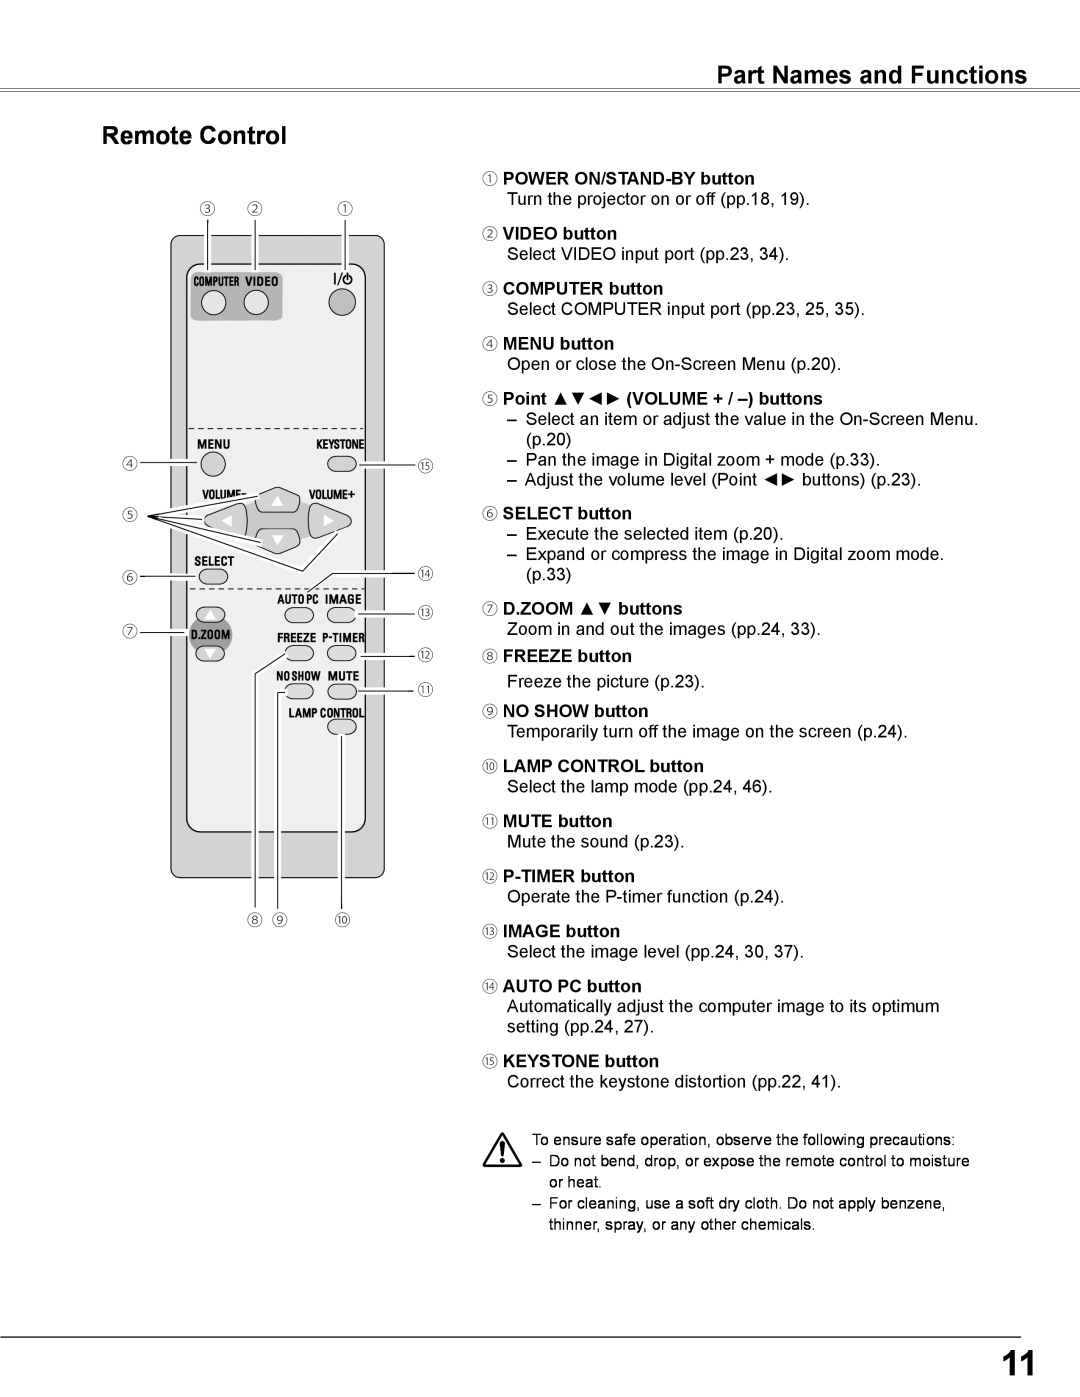 Sanyo PLC-WXL46 Part Names and Functions, Remote Control, ①POWER ON/STAND-BYbutton, ②VIDEO button, ③COMPUTER button 